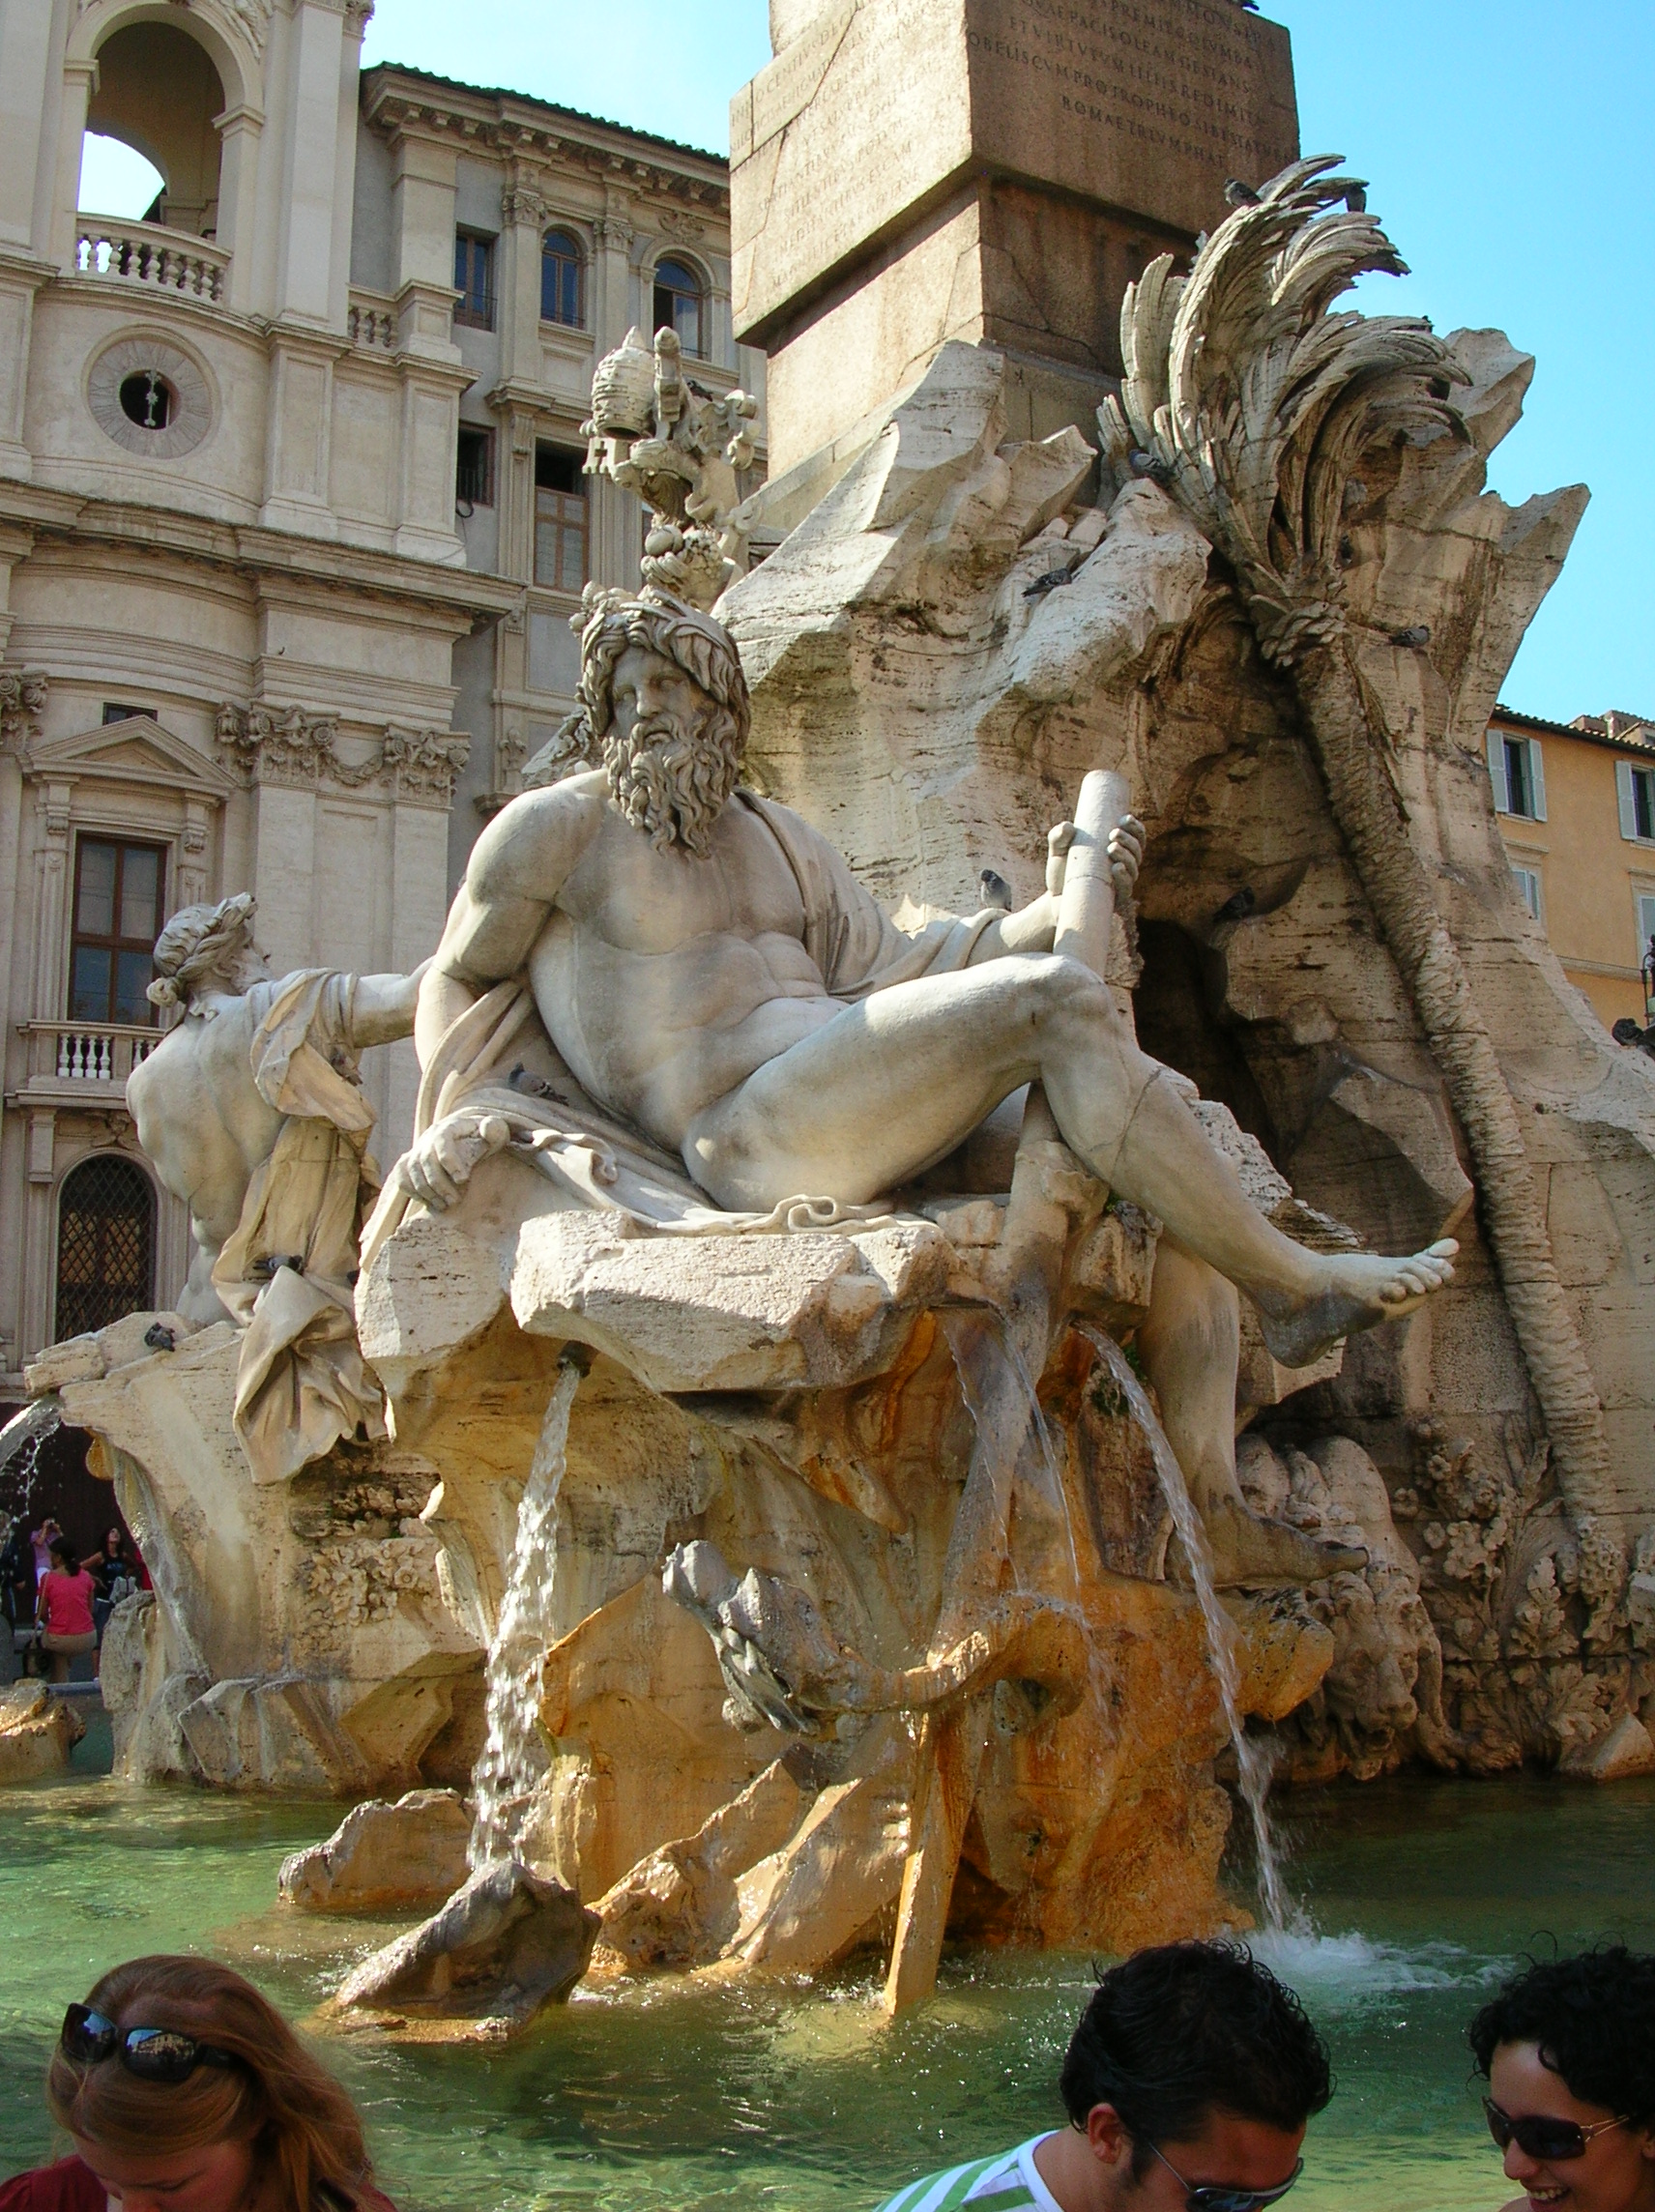 9-21-06 Bernini 4 Rivers in Piazza Navonna - Corks and Forks